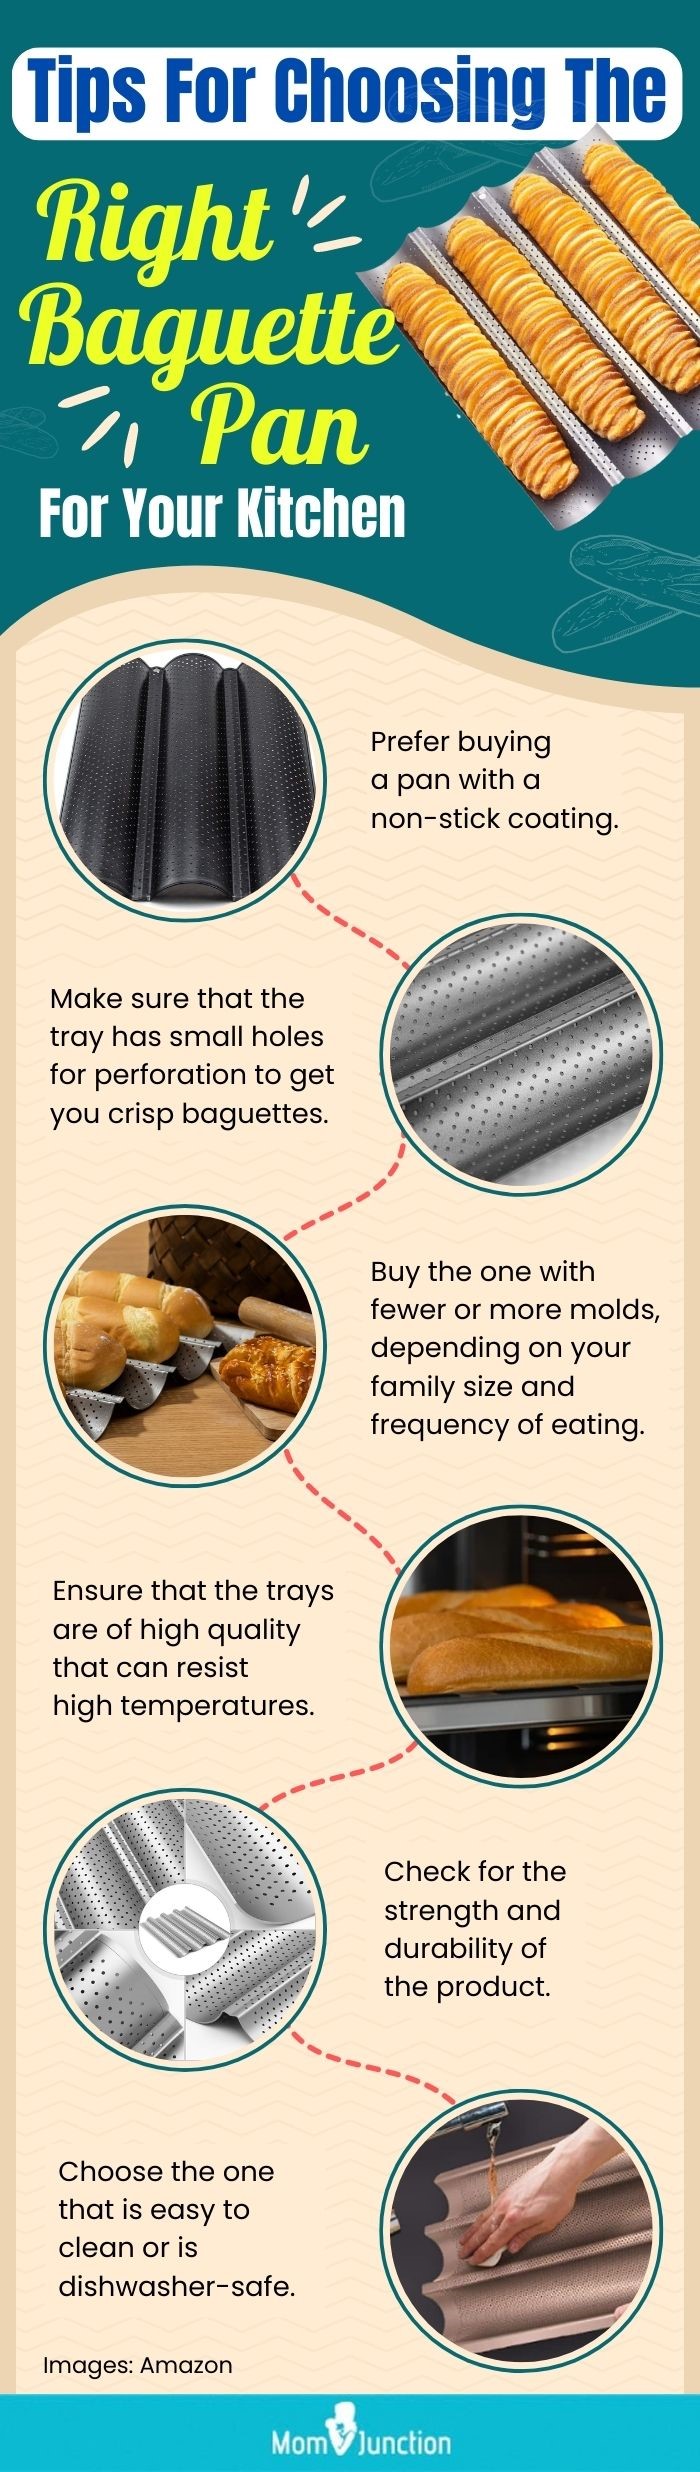 Tips For Choosing The Right Baguette Pan For Your Kitchen (infographic)